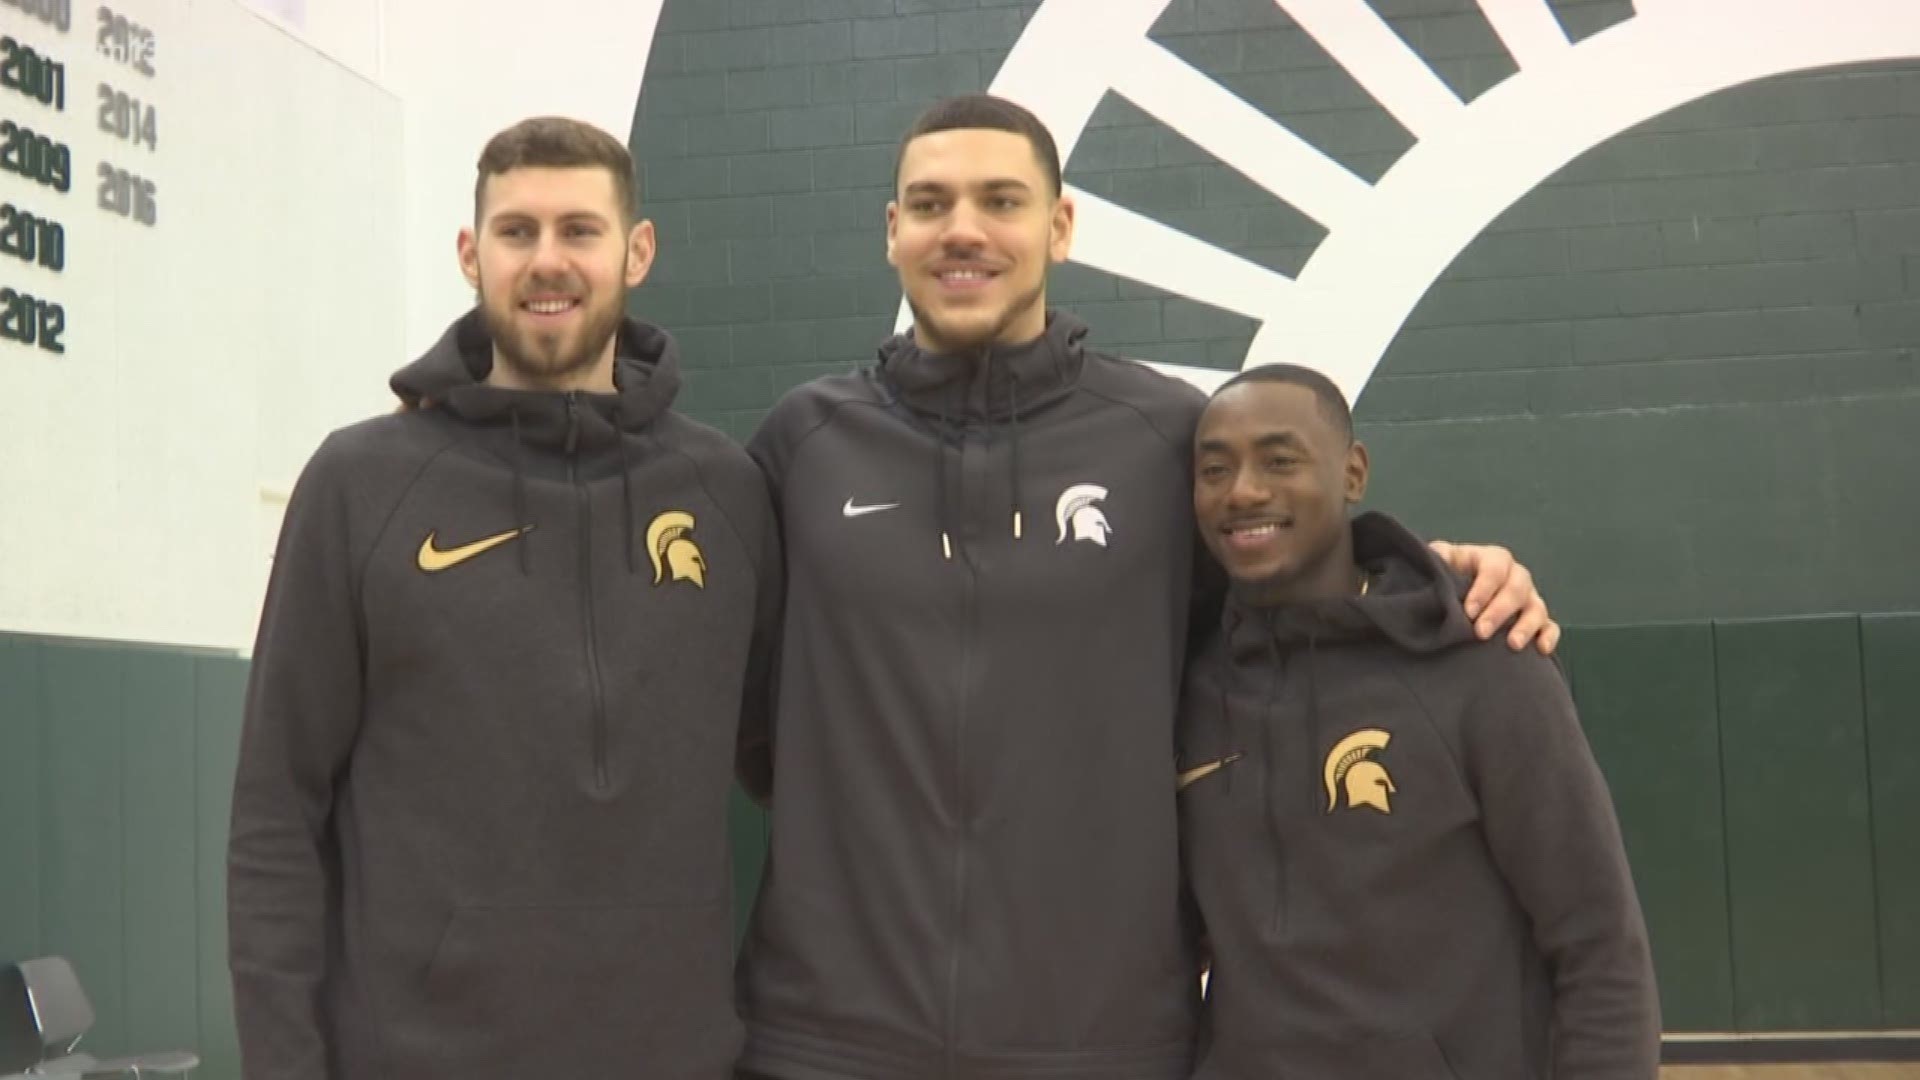 MSU Seniors to be honored after tonights game